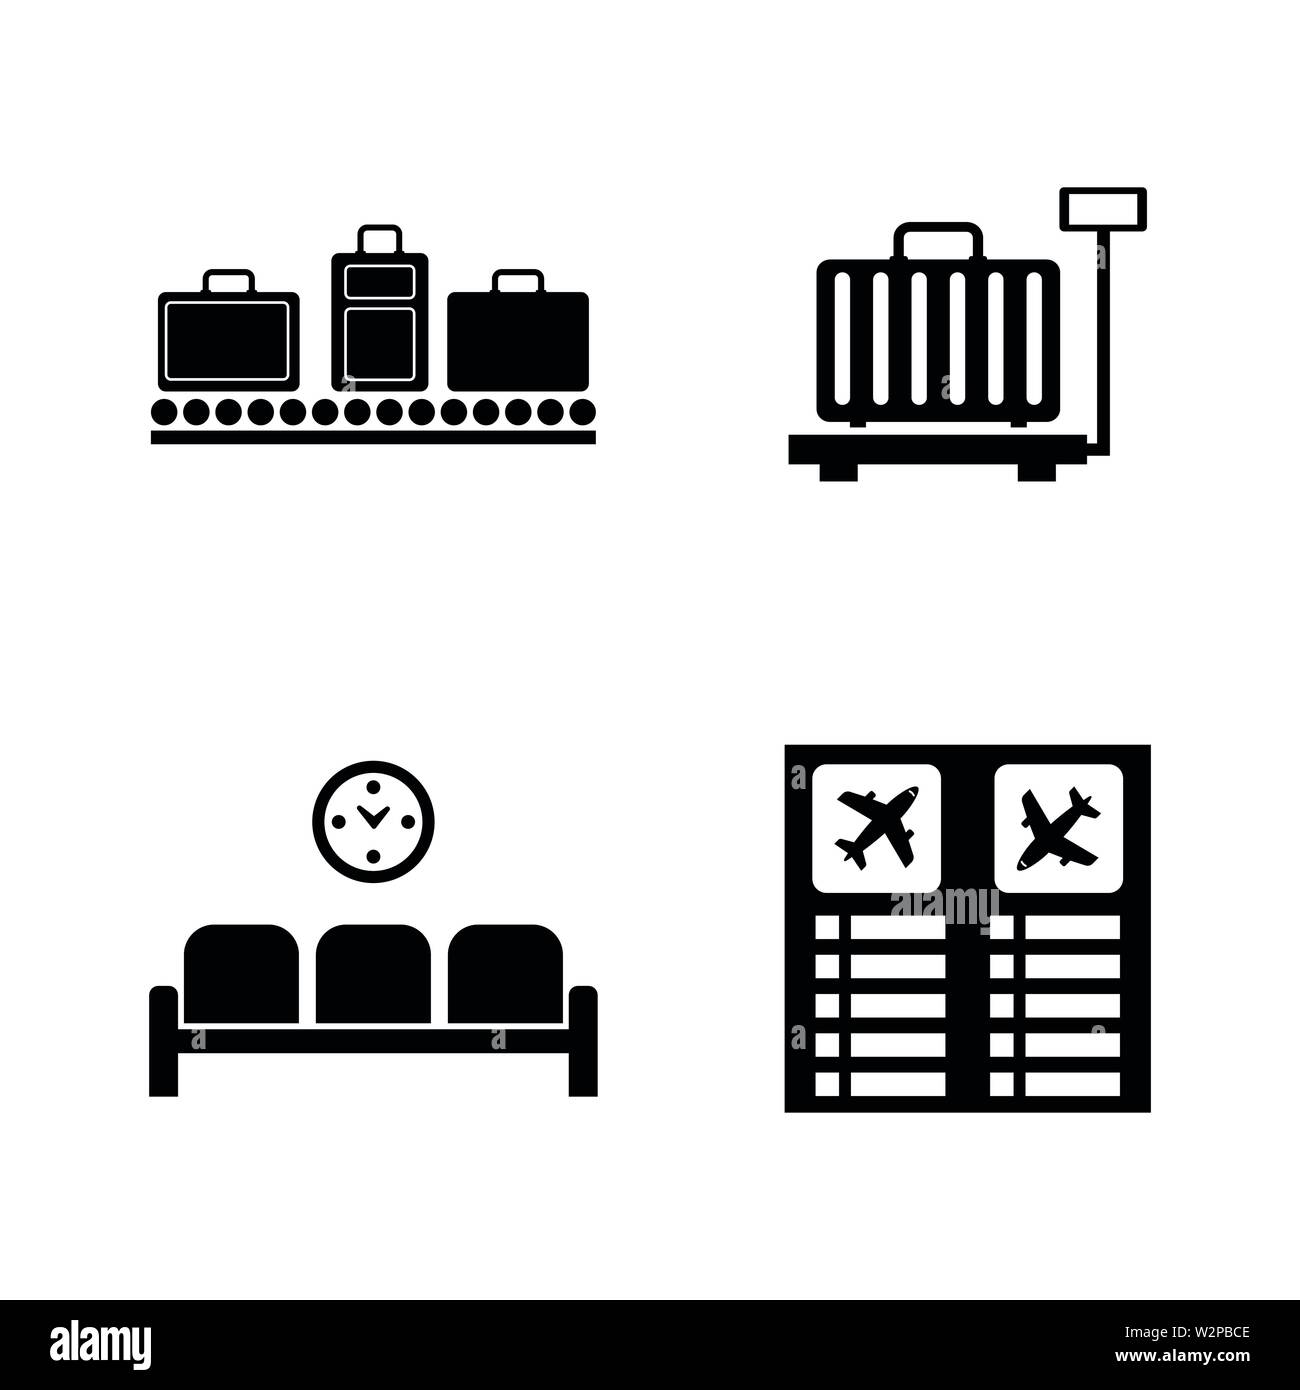 Airport Terminal. Simple Related Vector Icons Set for Video, Mobile Apps, Web Sites, Print Projects and Your Design. Black Flat Illustration on White Stock Vector